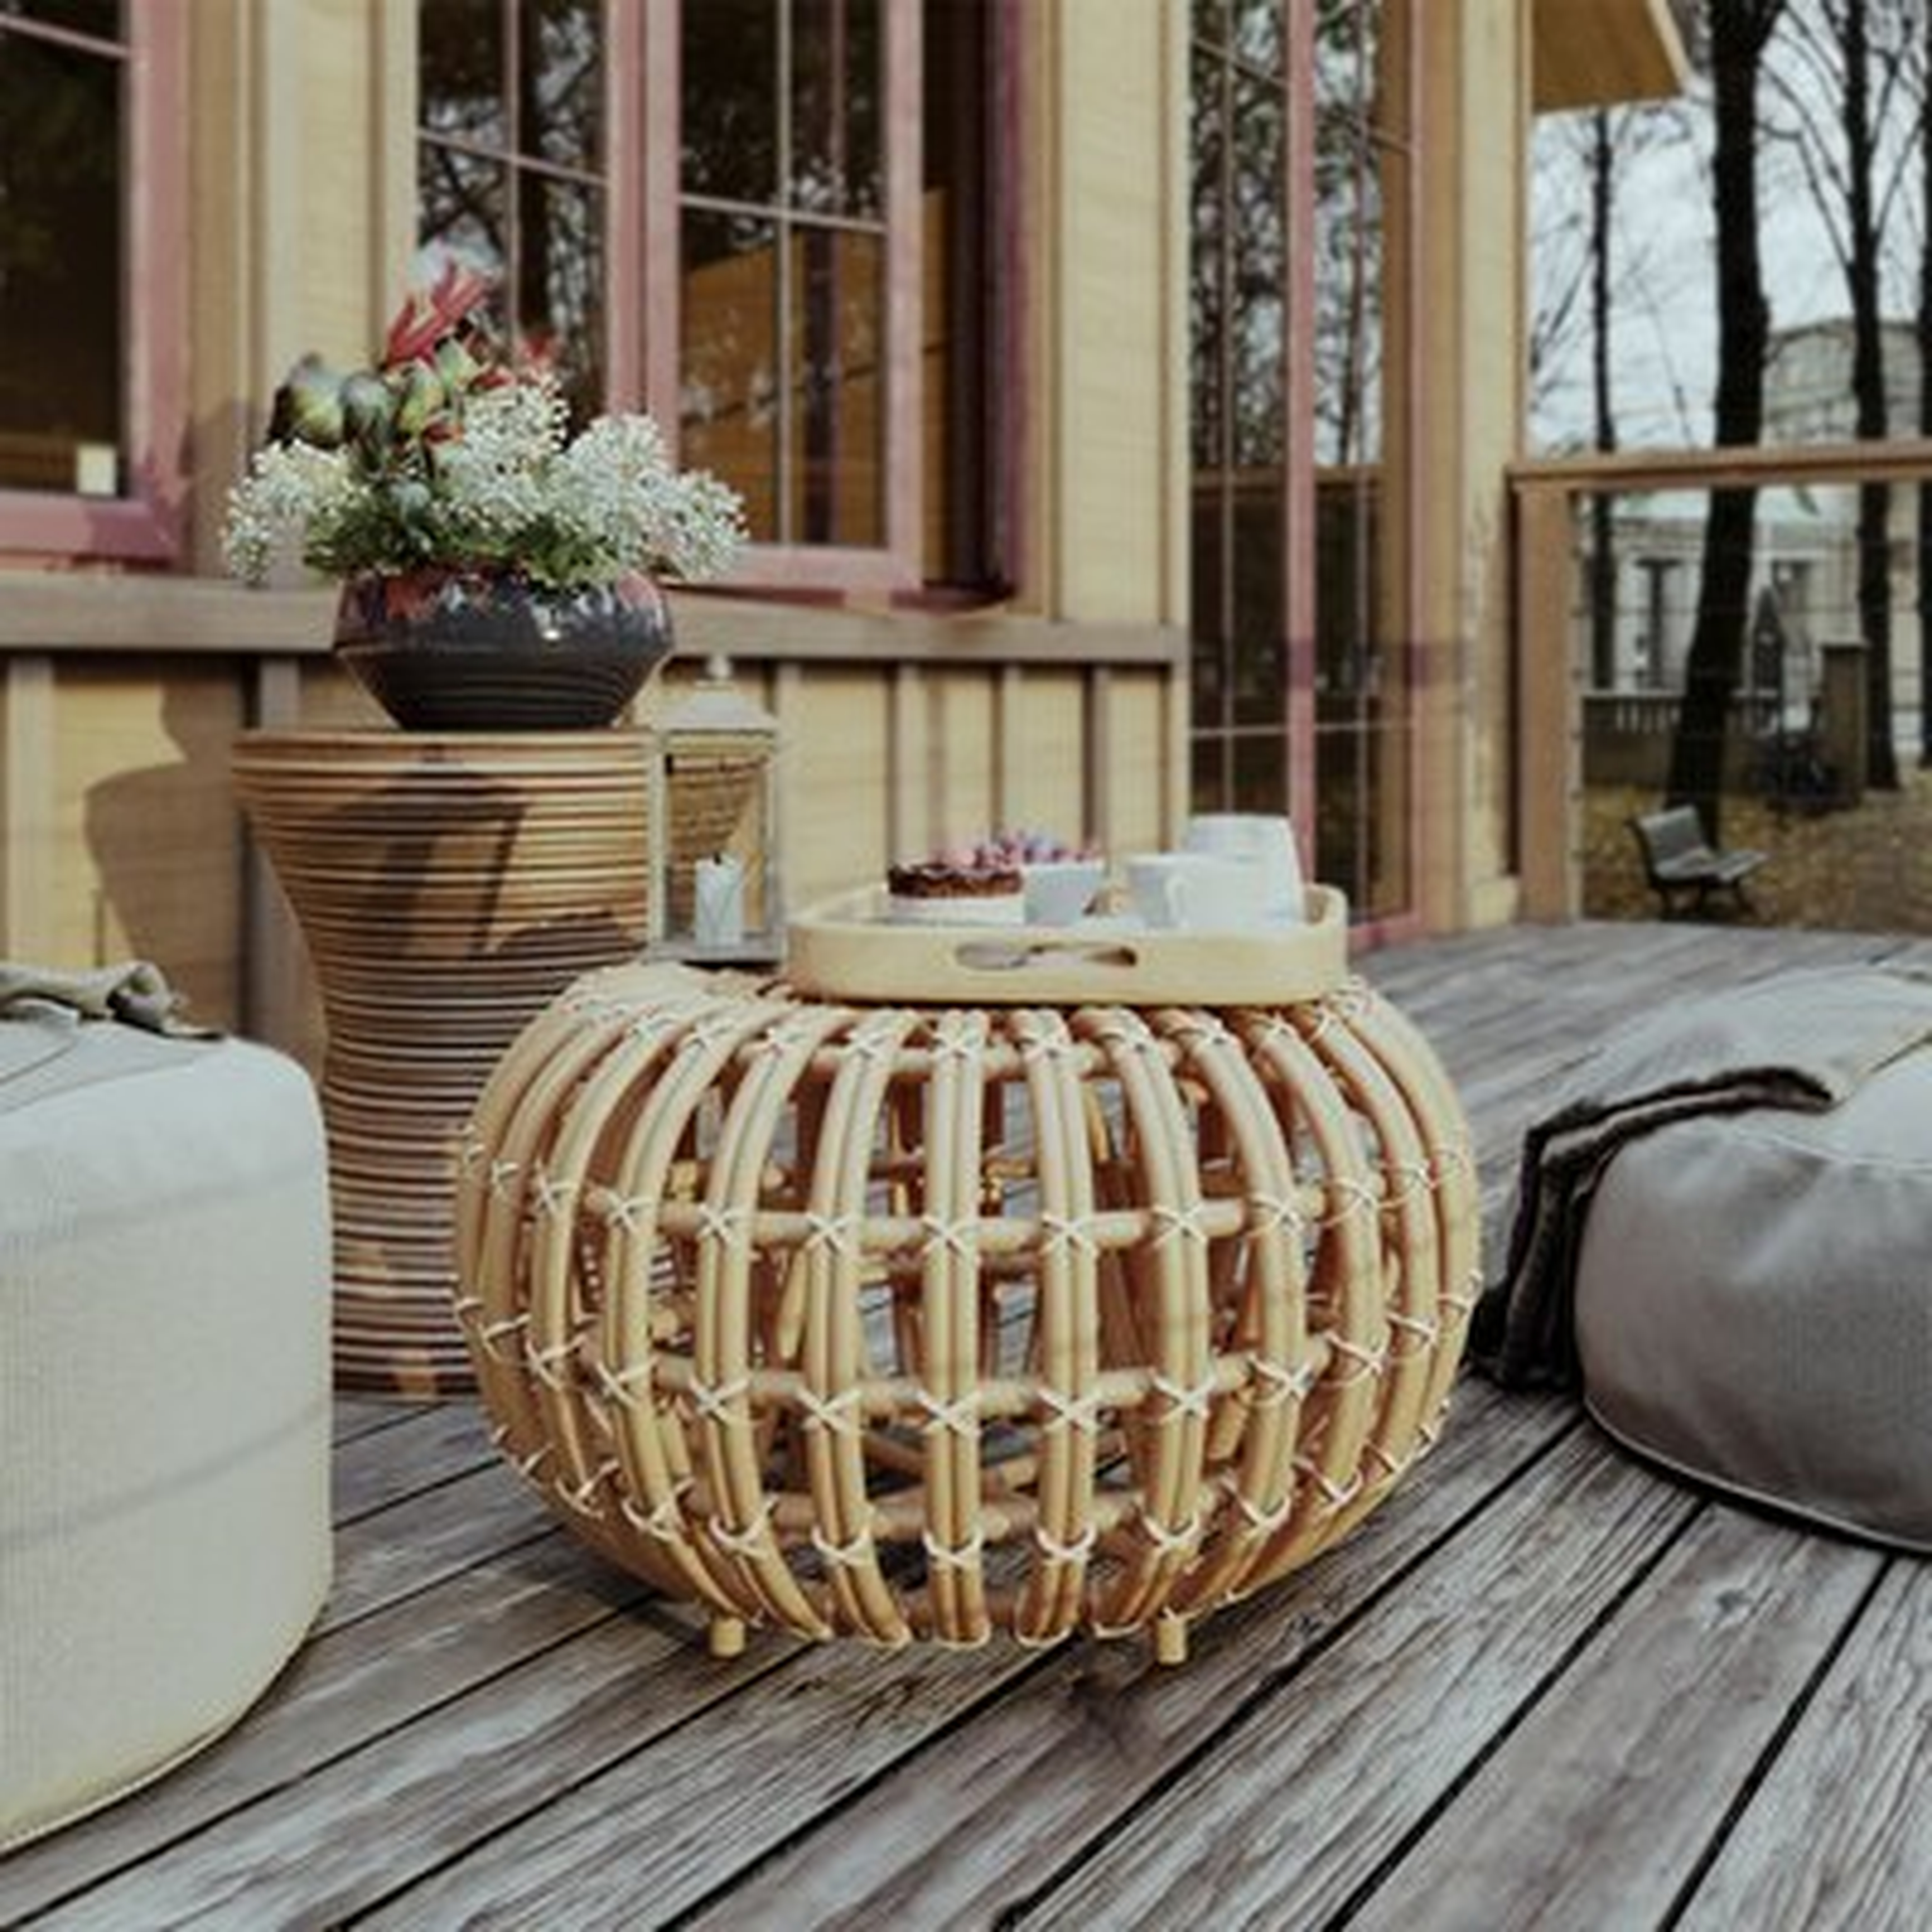 Wicker Round Coffee Table | Outdoor Patio Rattan Pouf - Farmhouse Front Porch Furniture - Backyard Deck Furniture Accent Table - Wayfair